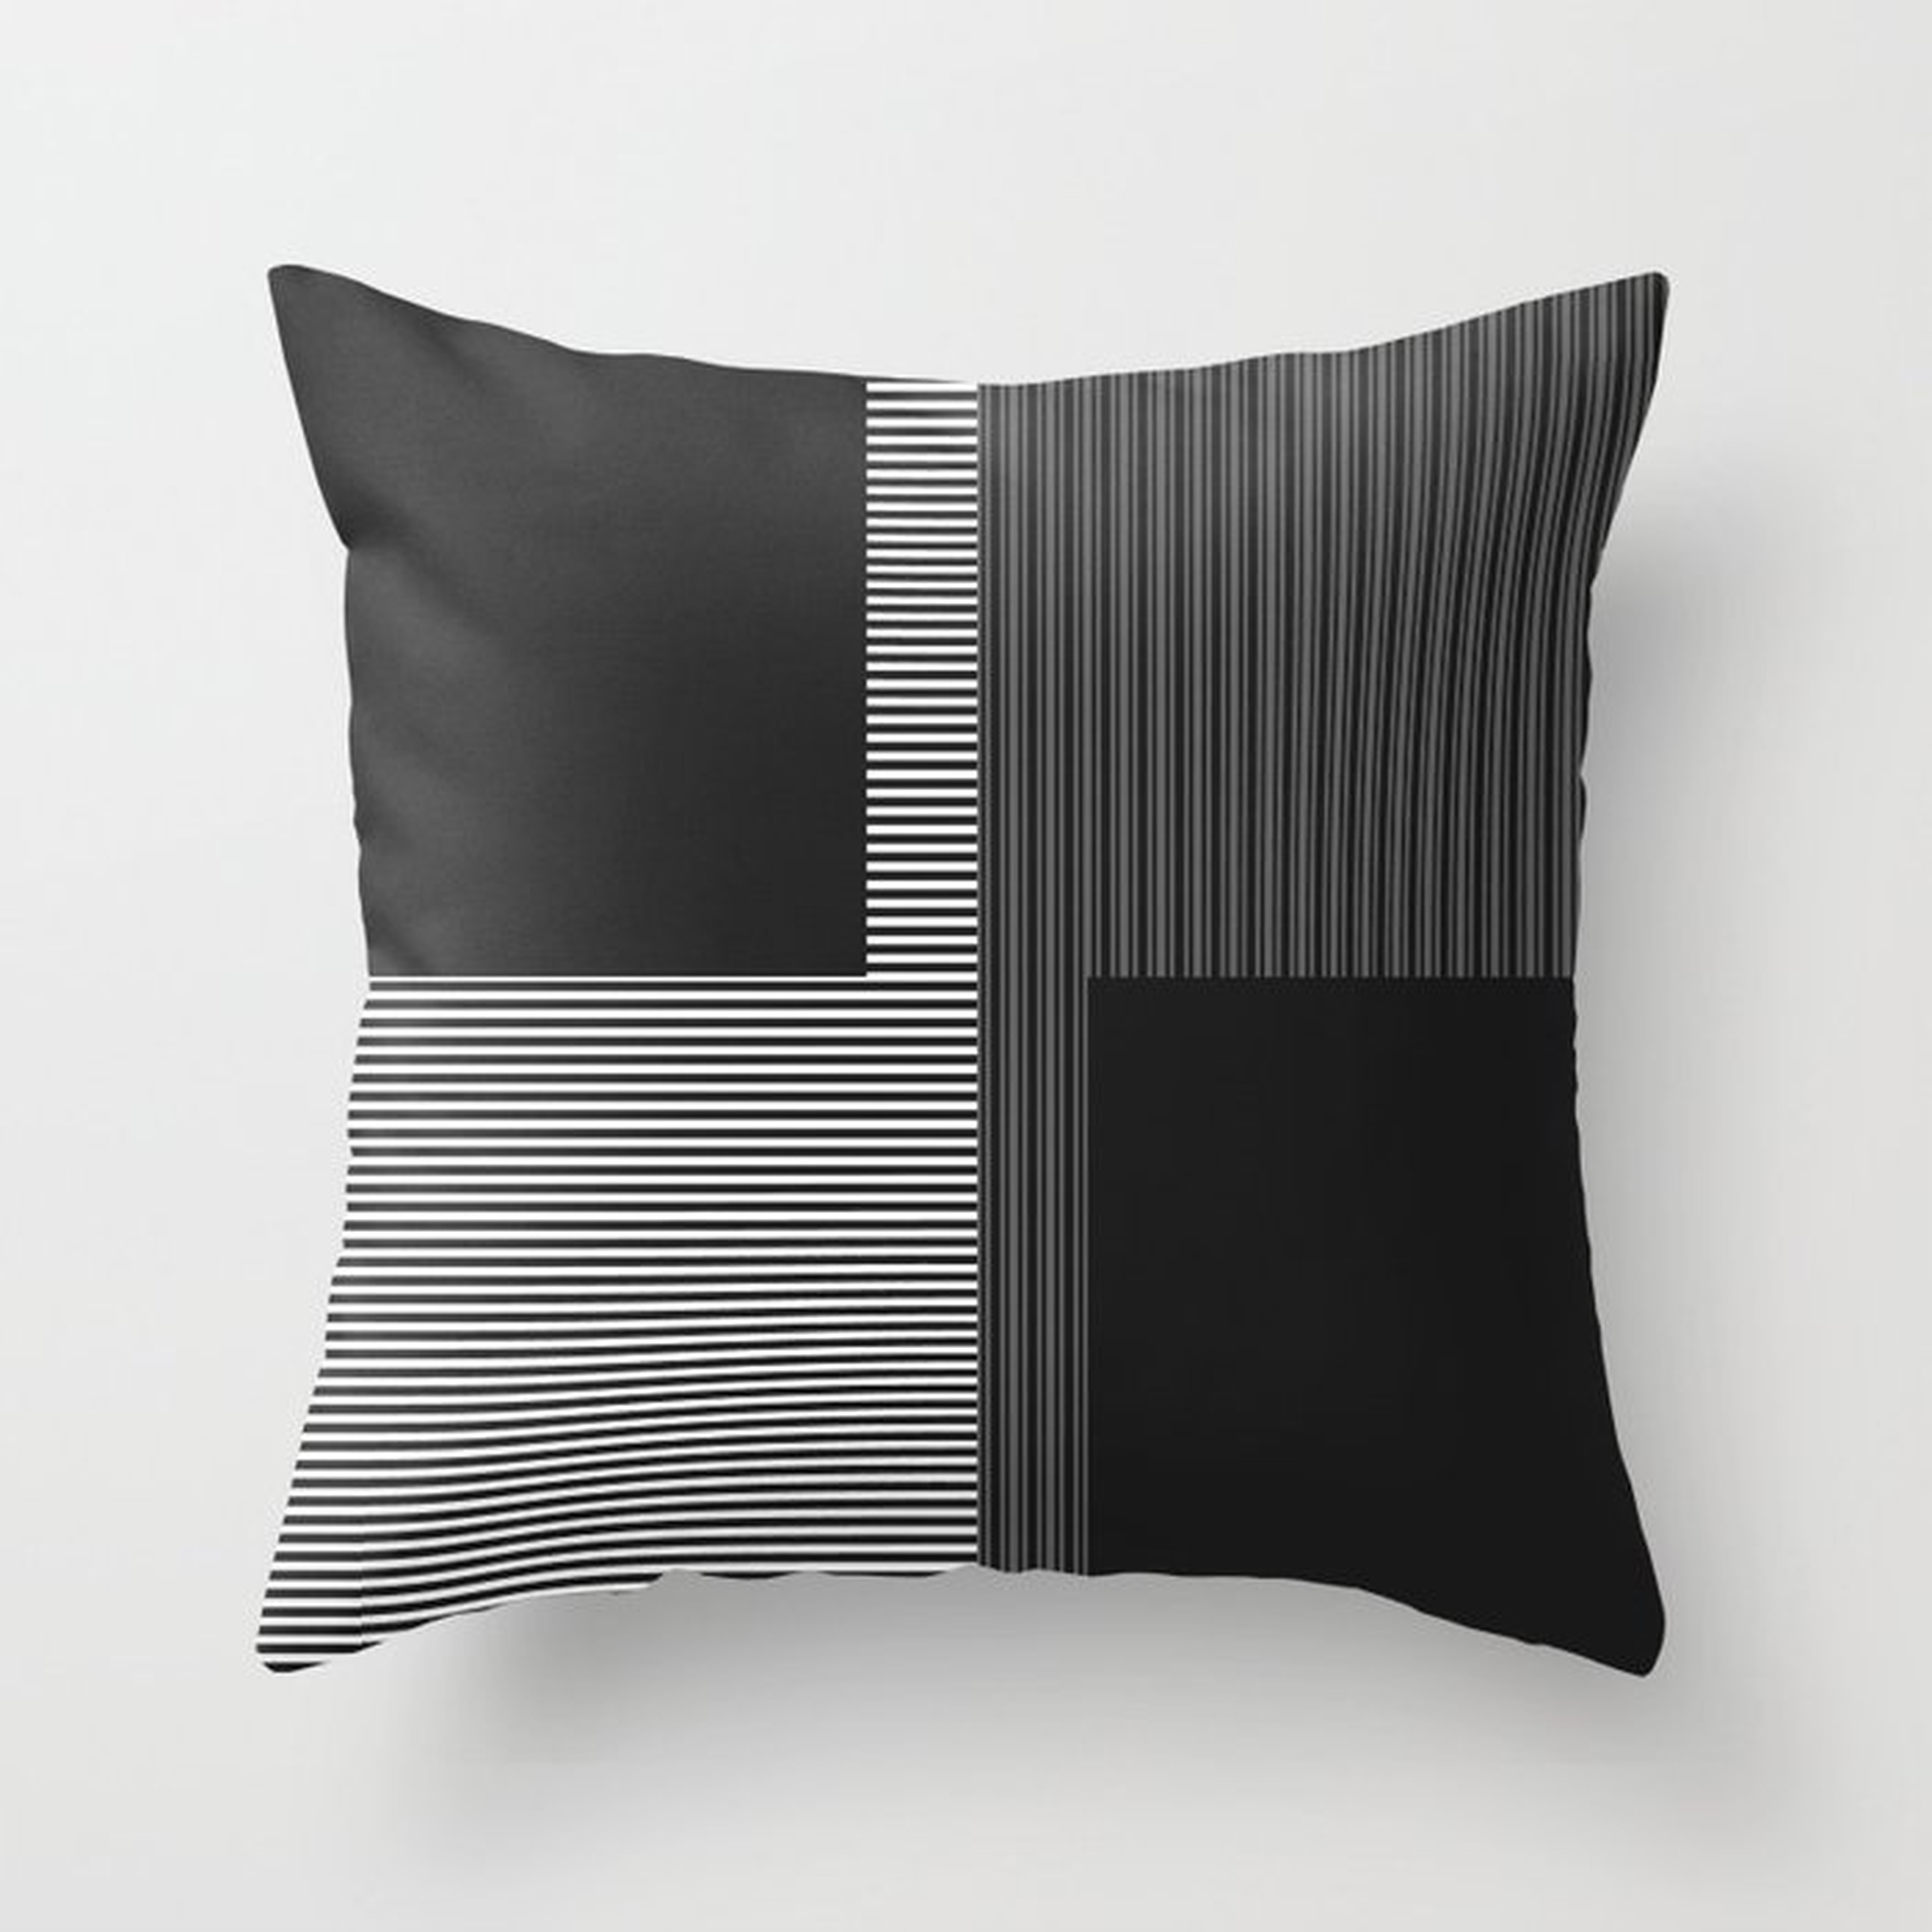 Figaro In Black And White Throw Pillow by House Of Haha - Cover (18" x 18") With Pillow Insert - Outdoor Pillow - Society6